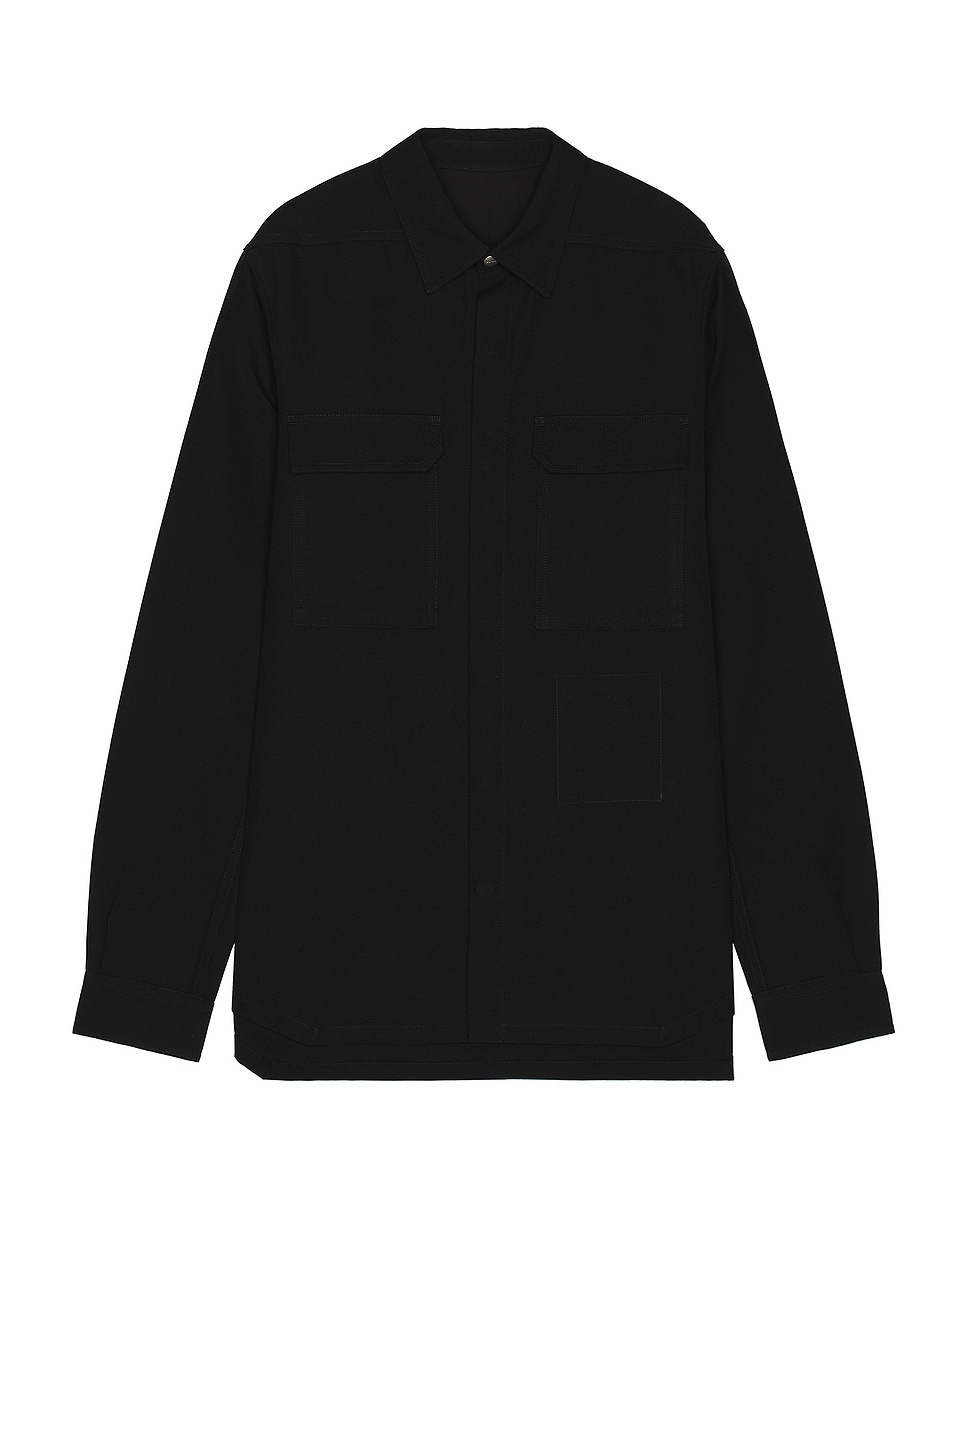 Image 1 of Rick Owens X Bonotto Outer Shirt in Black